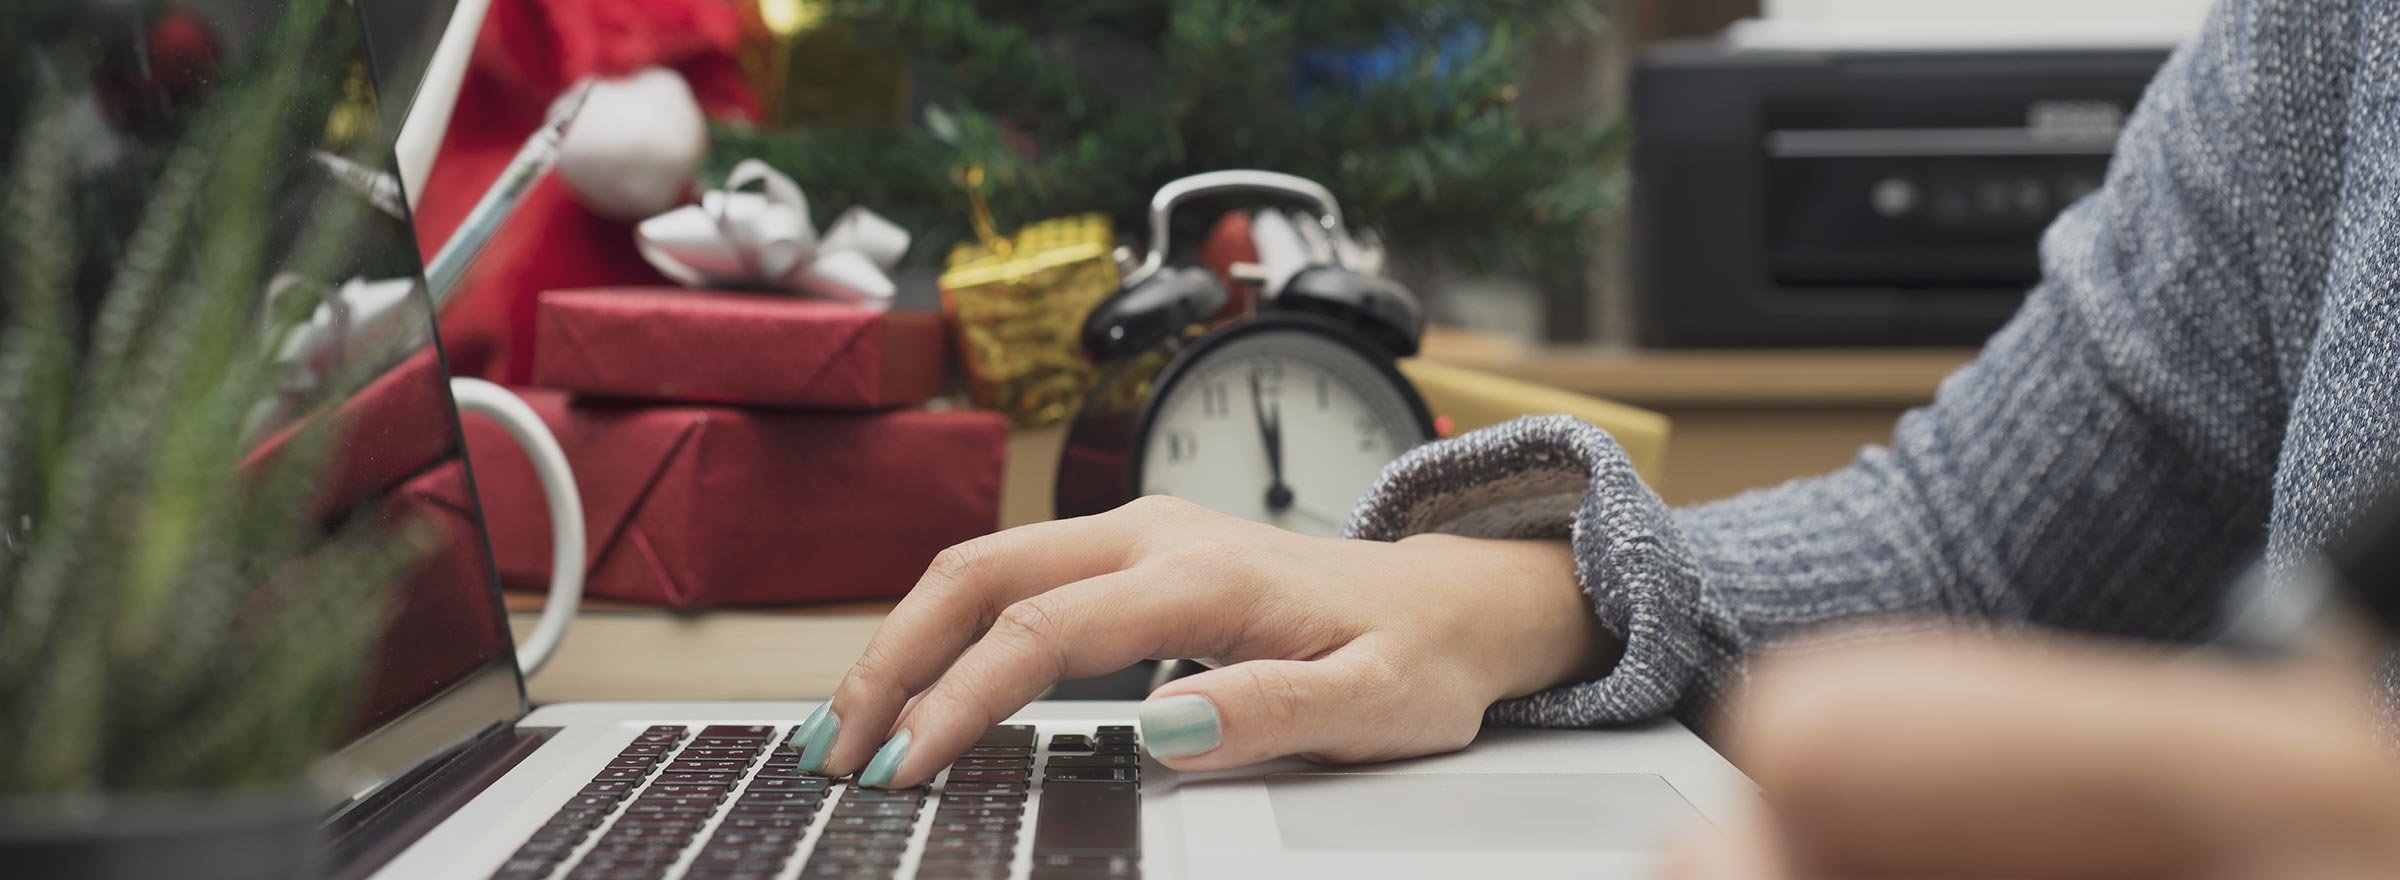 hand on a keyboard with wrapped gifts and alarm clock in background